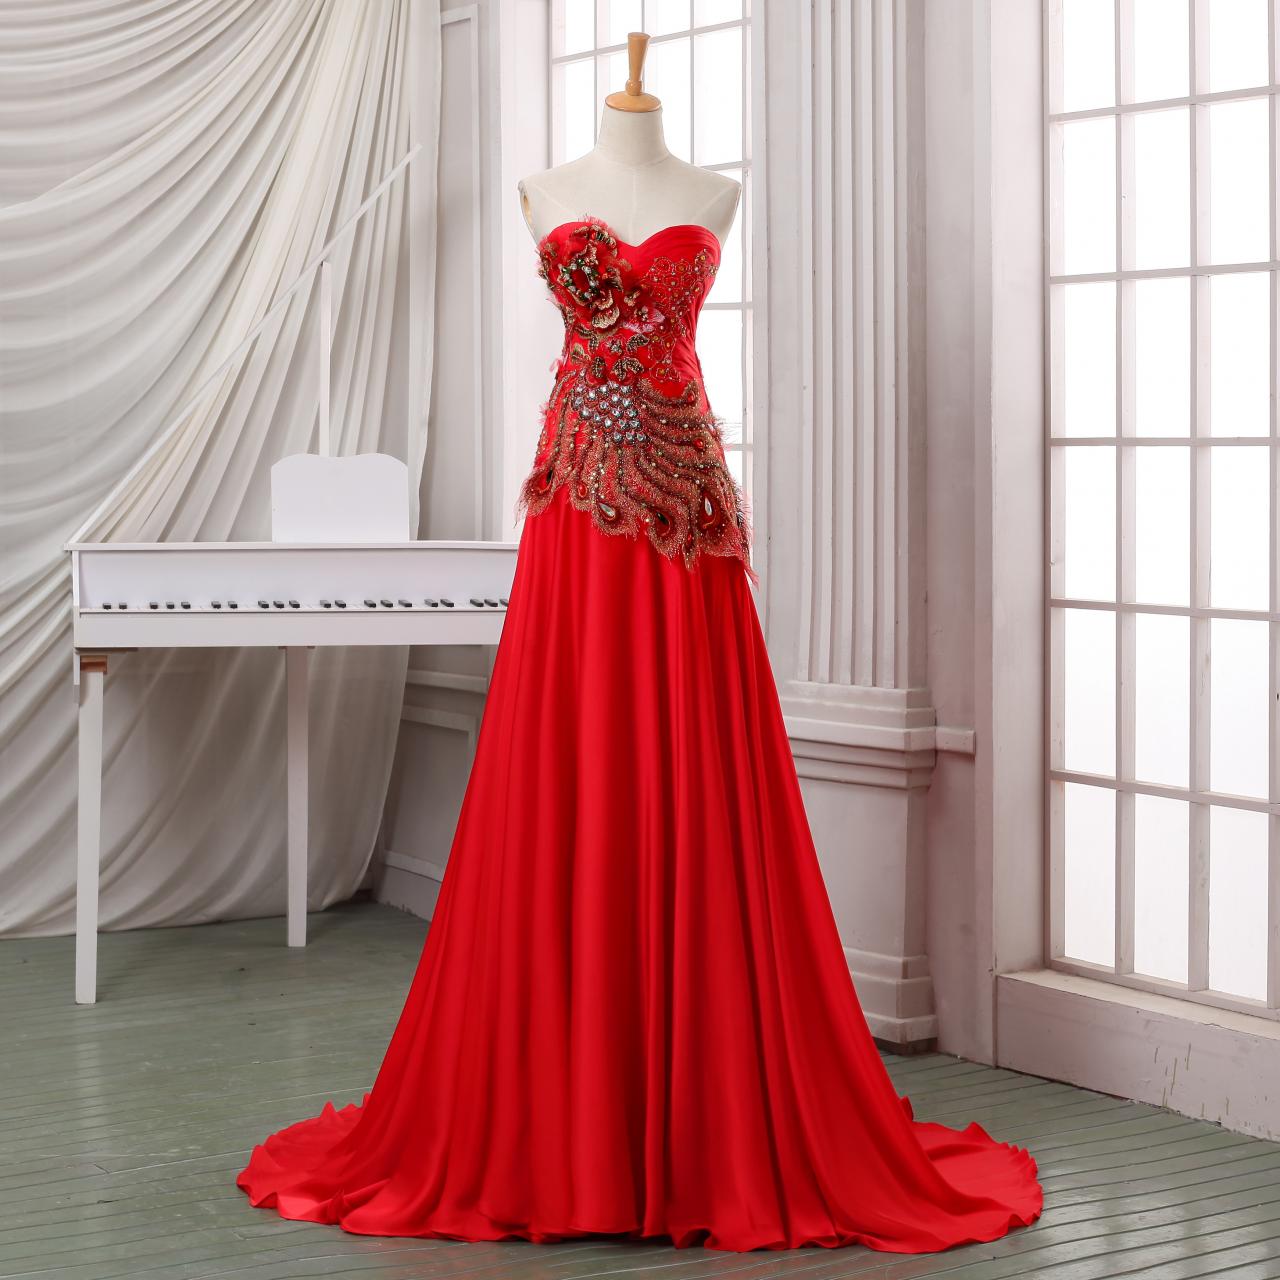 Strapless Long Red Chiffon Fromal Evening Dress,red Chiffon Wedding Dress,handmade Red Long Prom Dress,formal Evening Dress,party Dress.